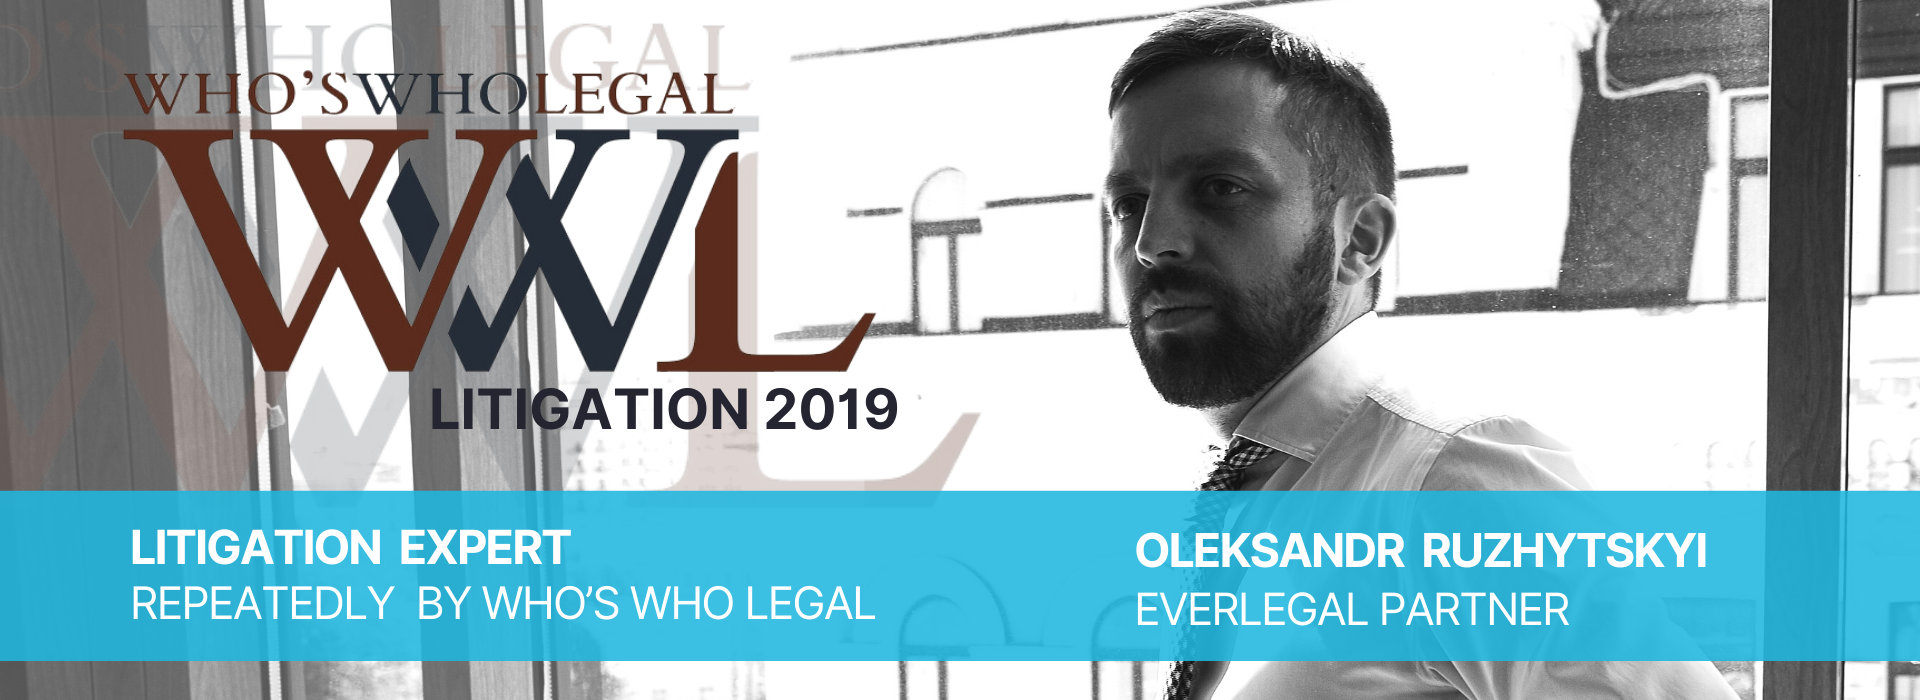 Who’s Who Legal: Litigation 2019: Oleksandr Ruzhytskyi, Partner at Everlegal, Is Repeatedly Recommended as Litigation Expert